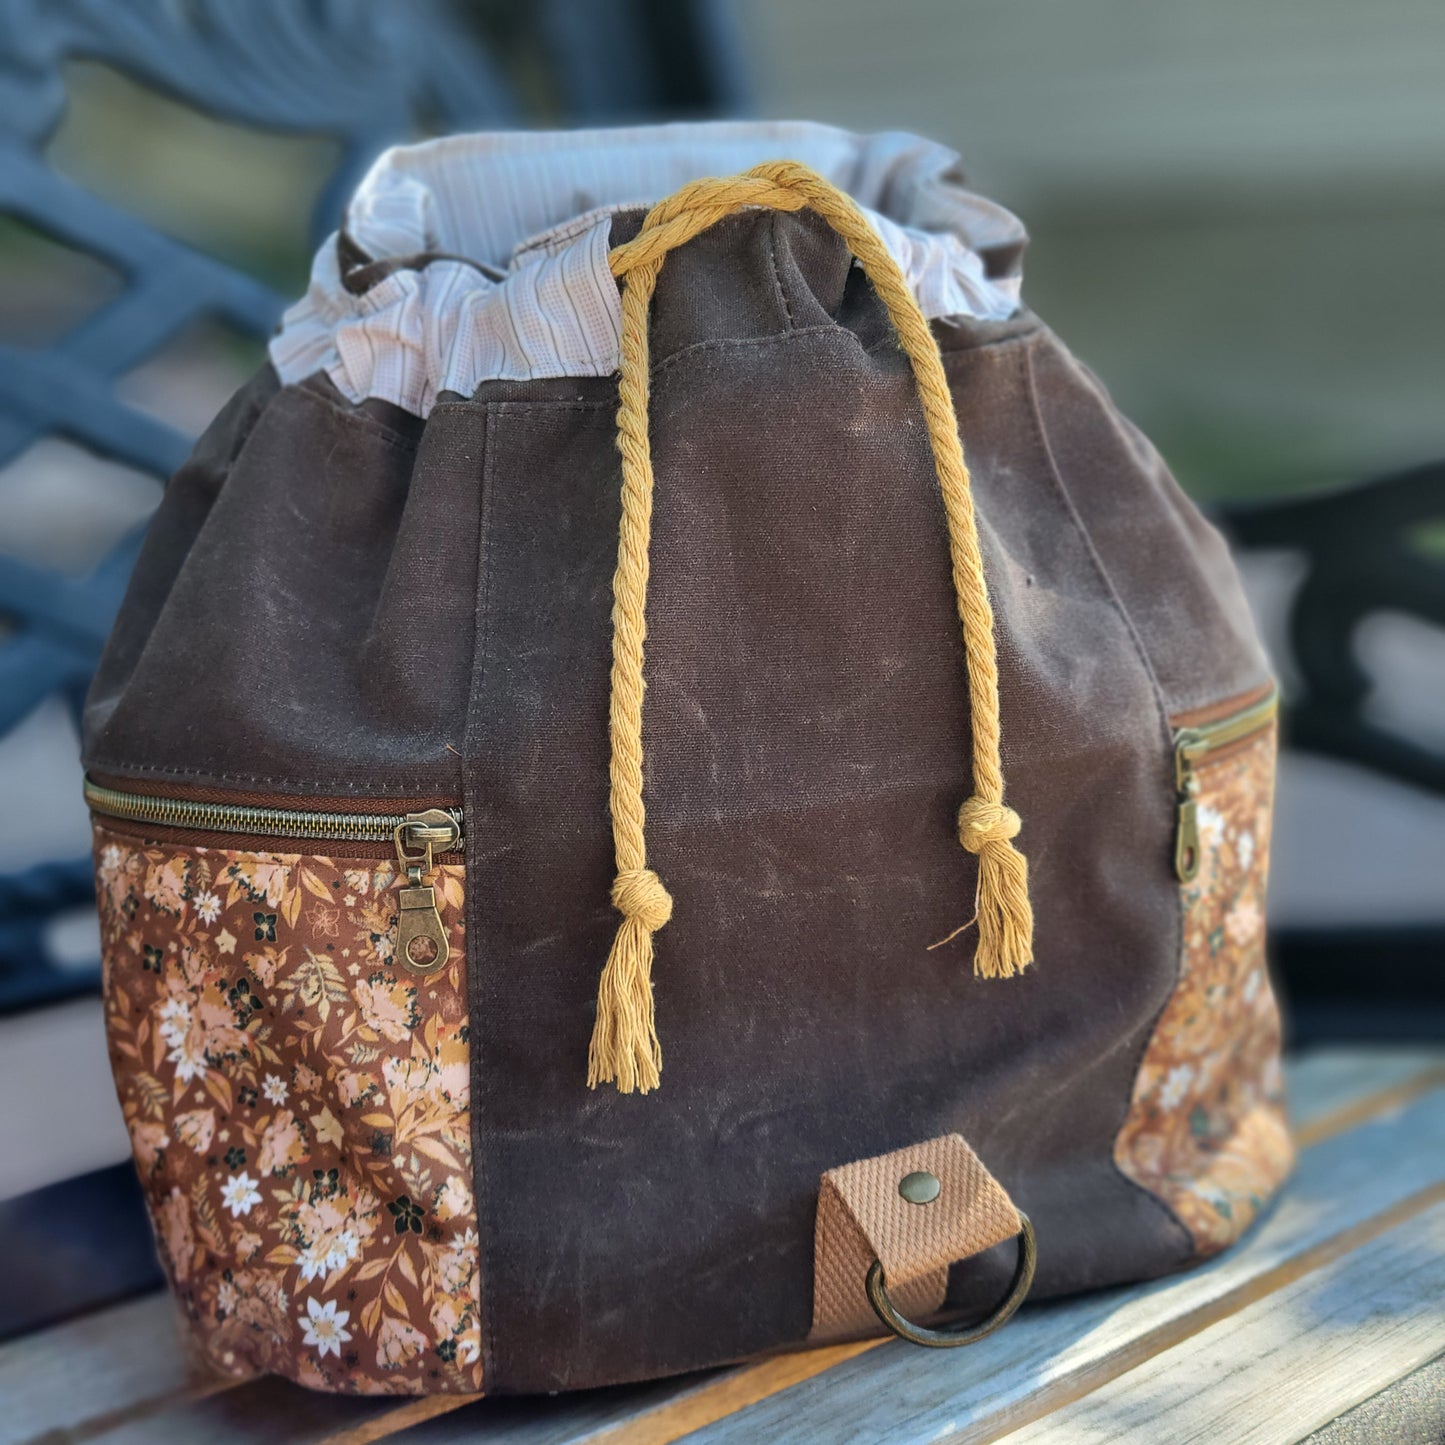 SAMPLE Autumn Florals Bee Balm Backpack